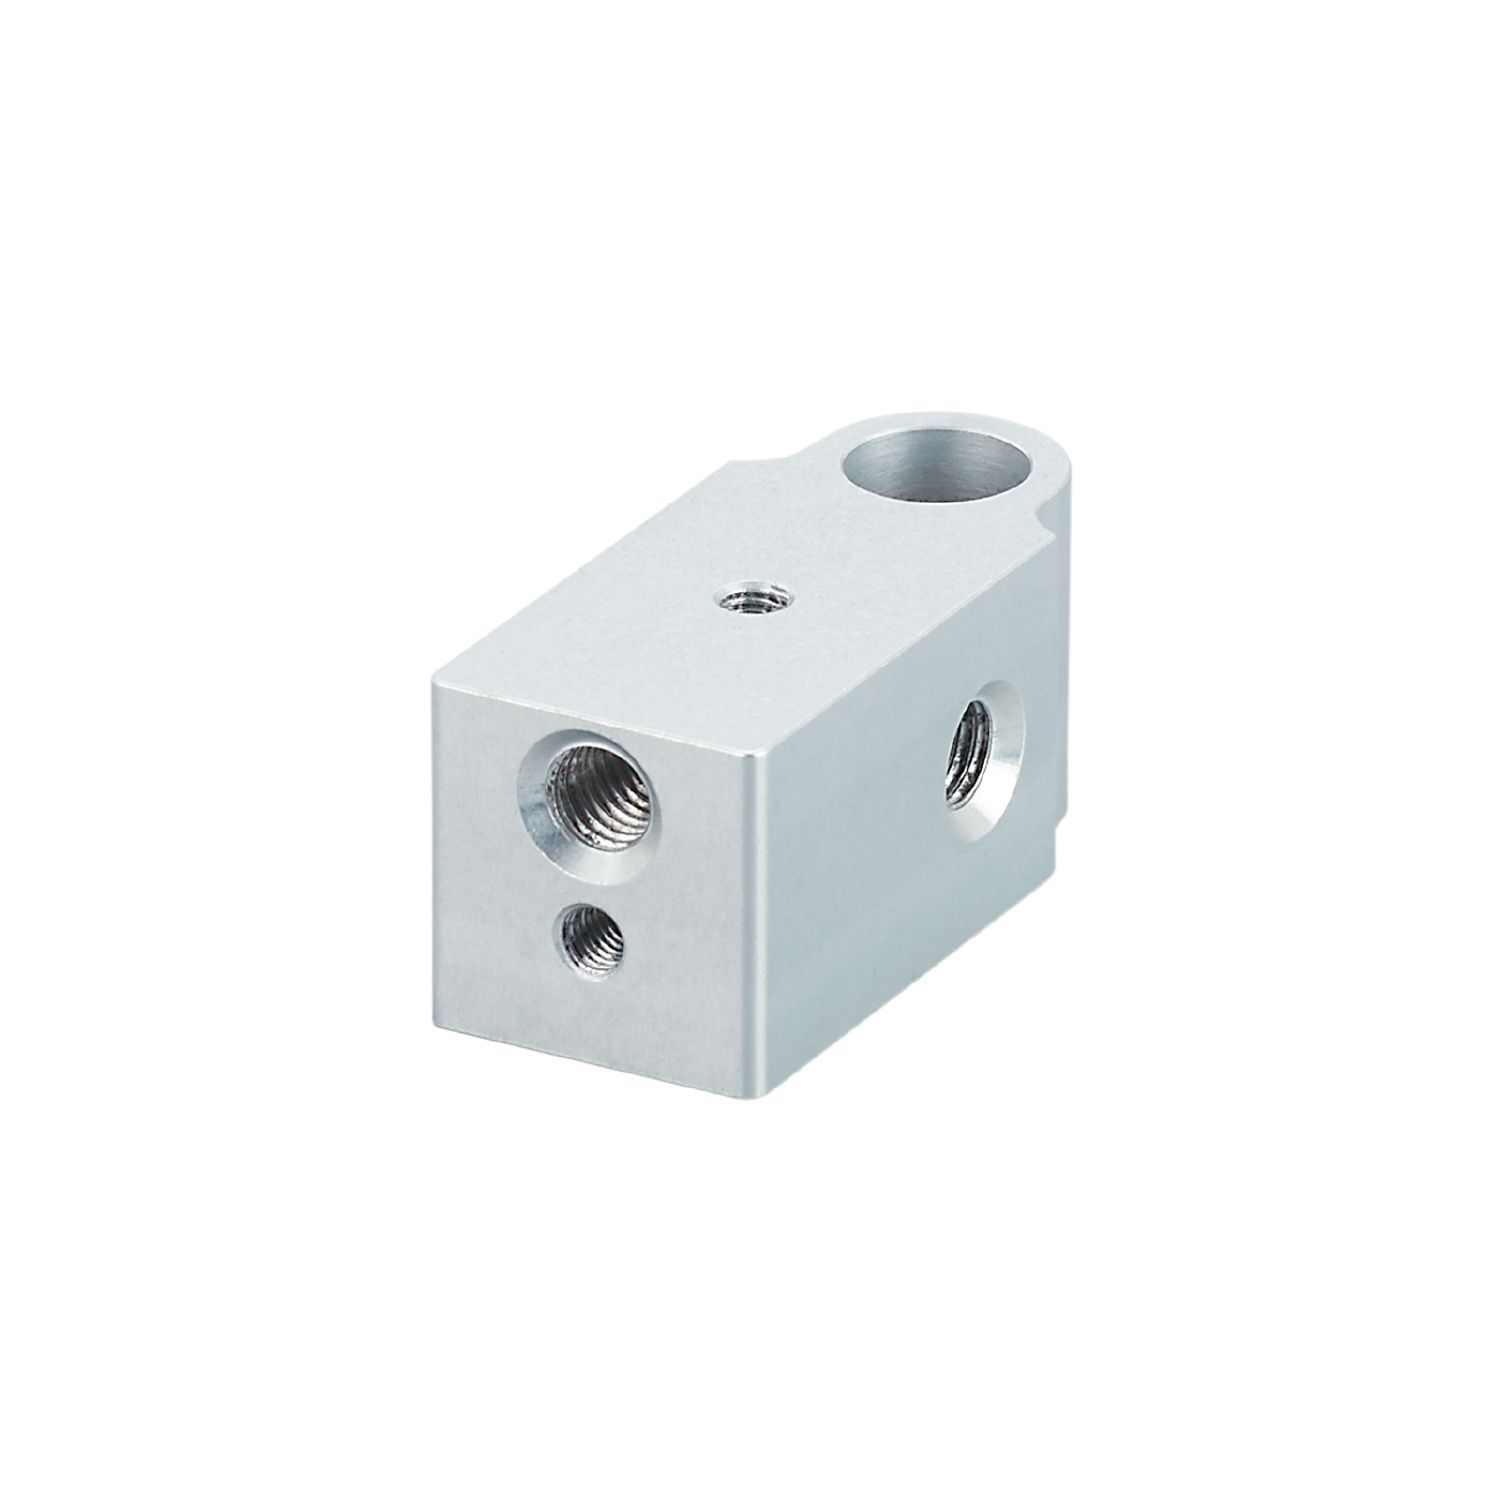 E30468 - Mounting adapter - ifm